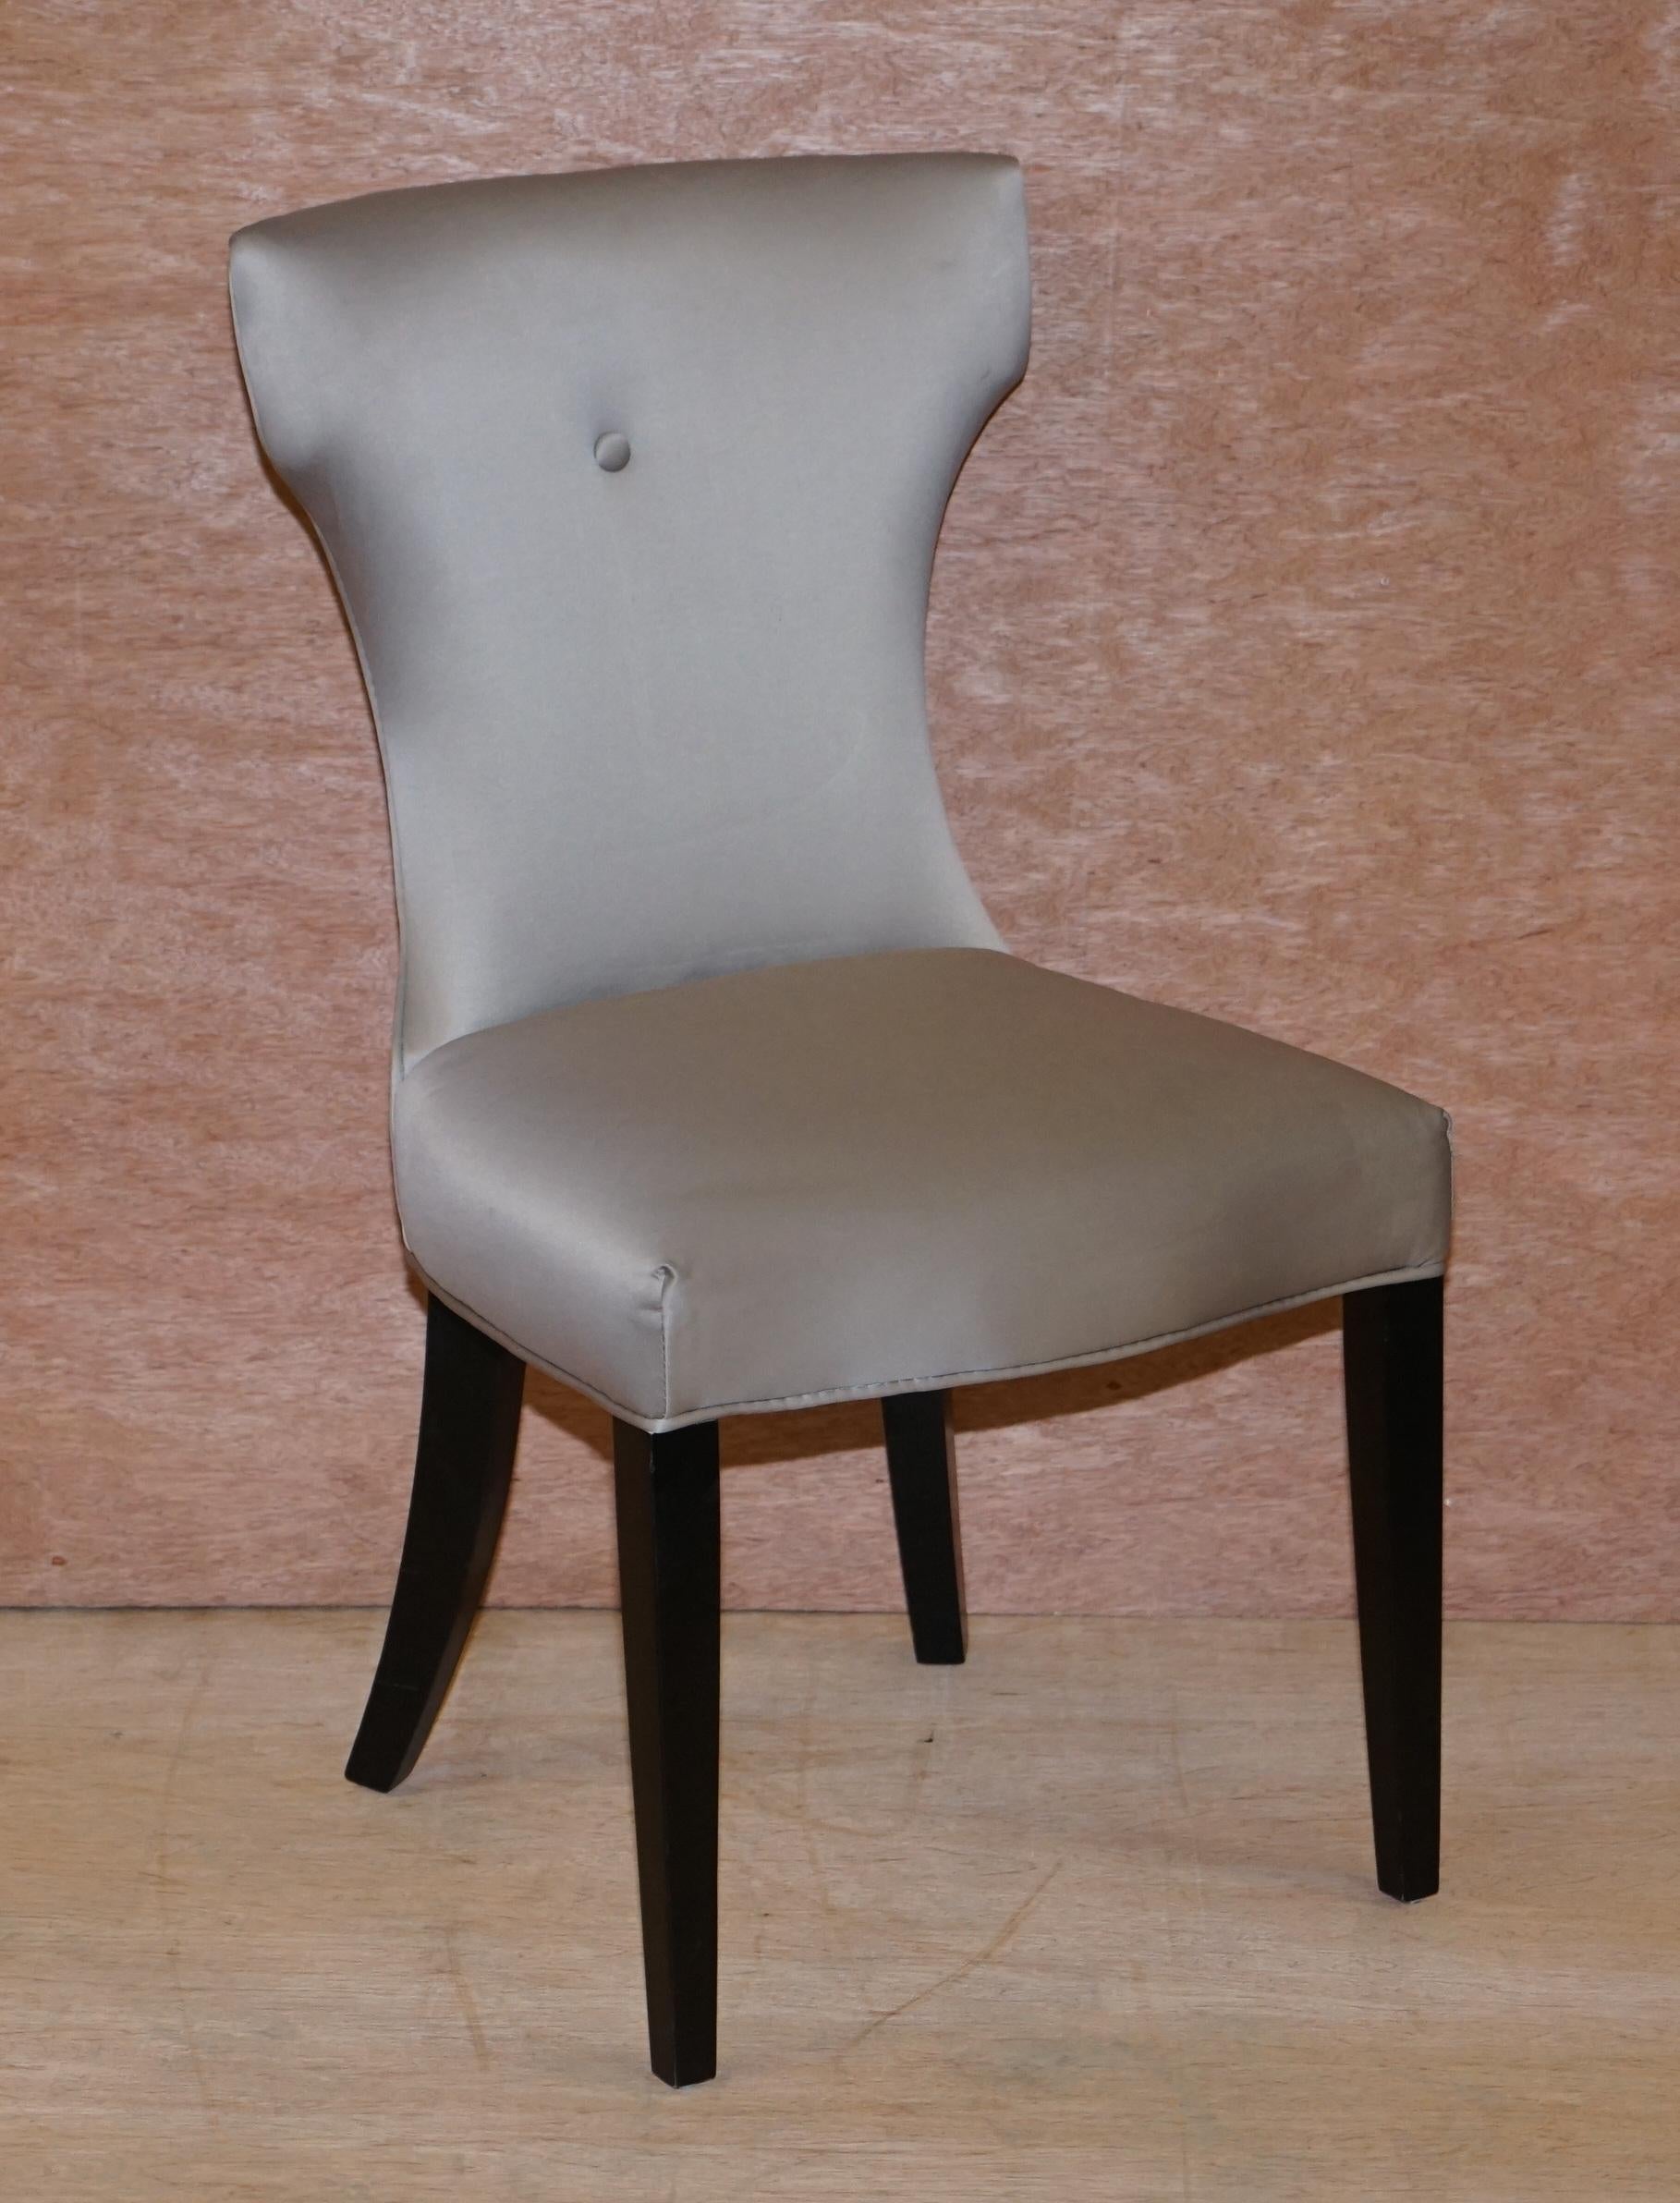 We are delighted to offer for sale this lovely suite of eight Coach House Chairs LTD single button dining chairs with silky upholstery and ebonized frames

These are a very good looking and well made, stylish suite of dining chairs. They retailed